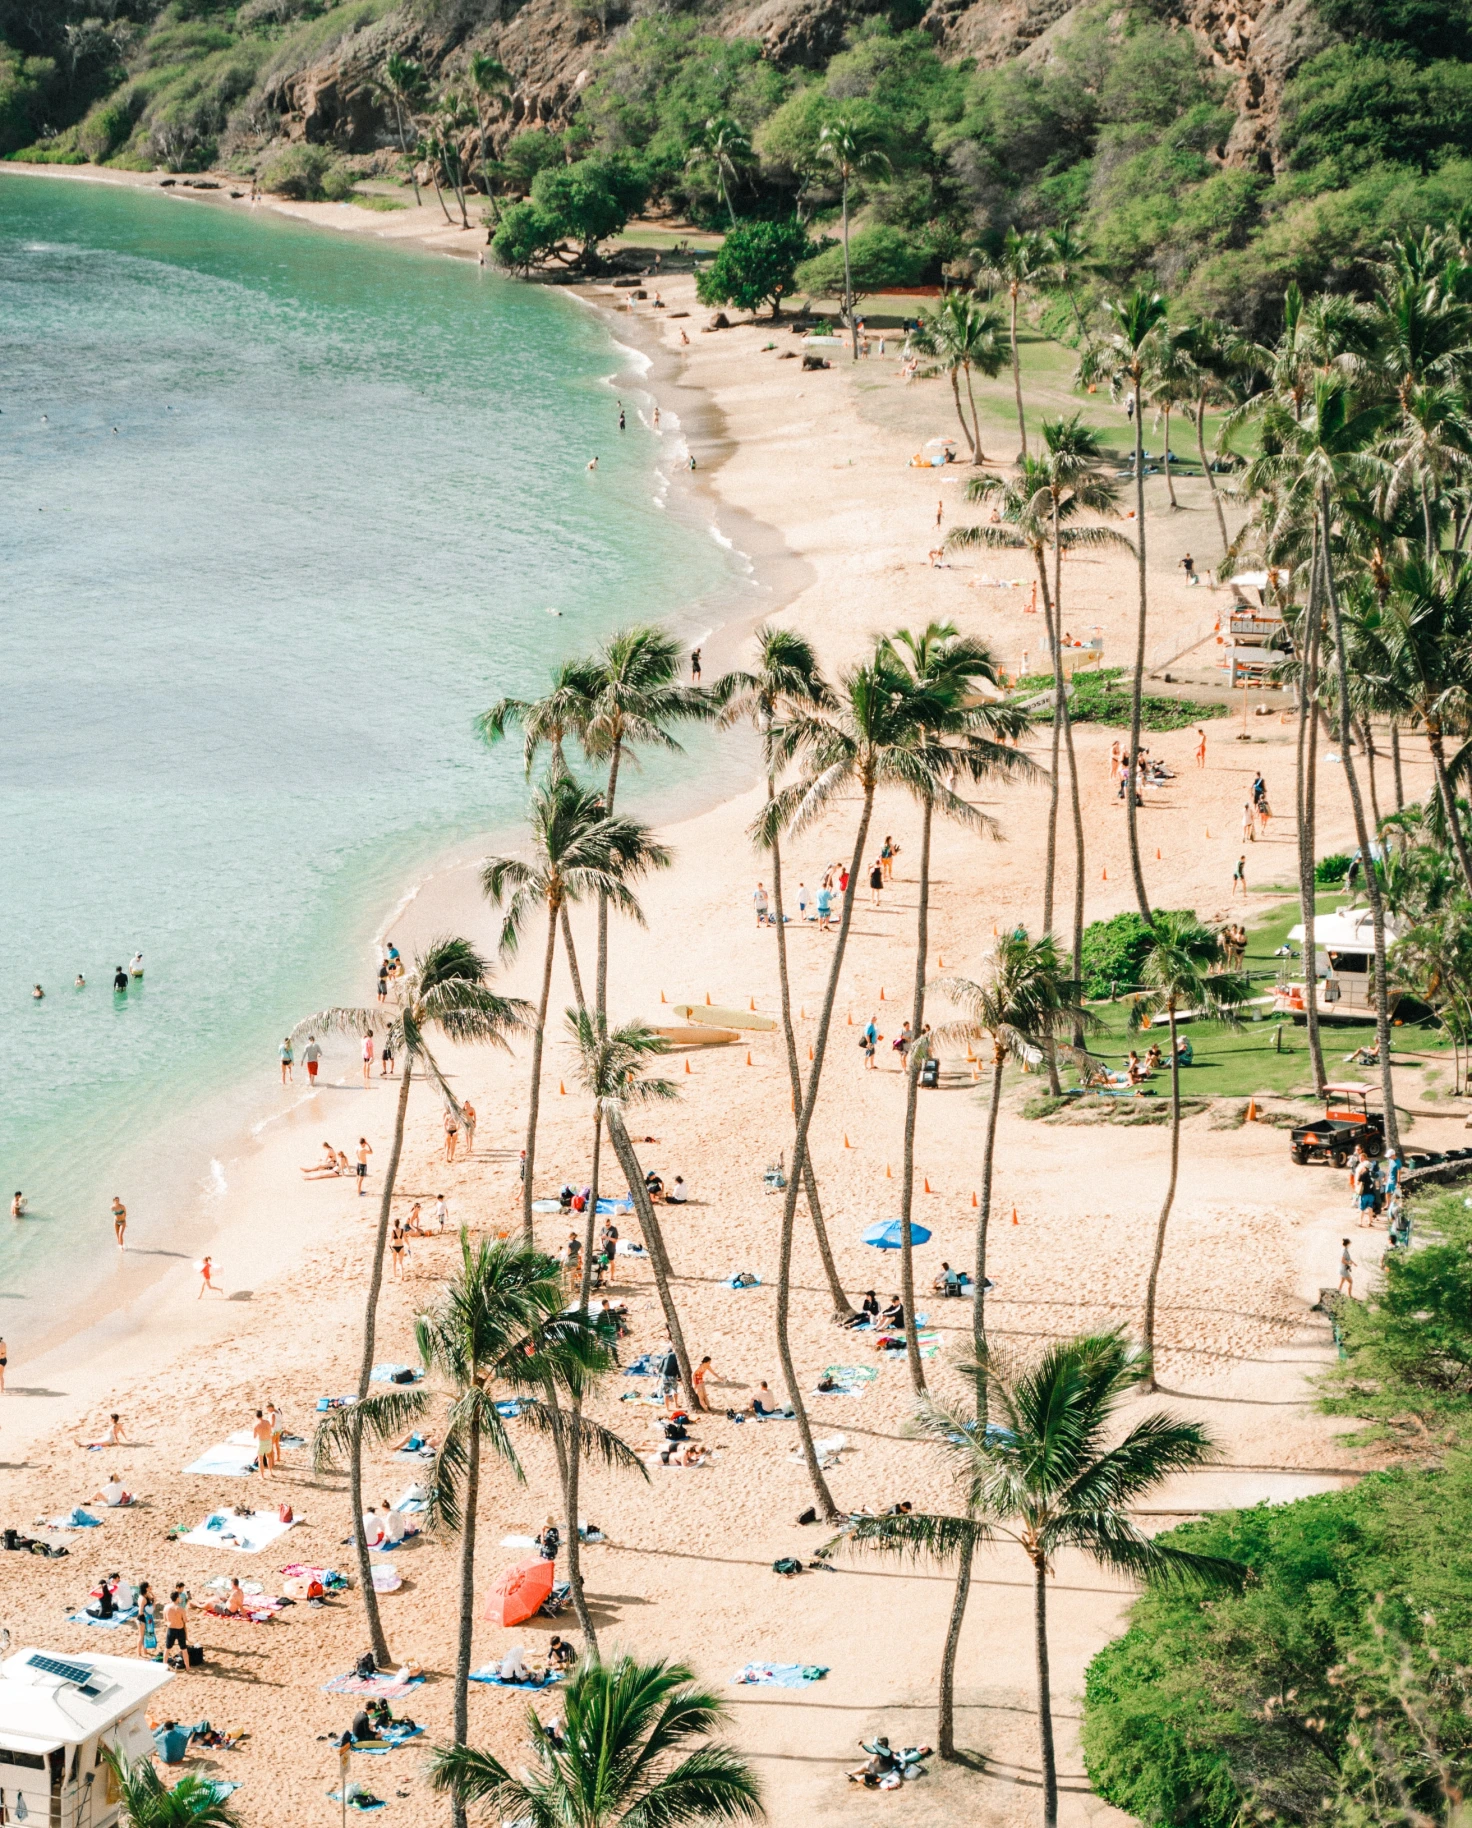 Hawaii beach surrounded with palm trees.